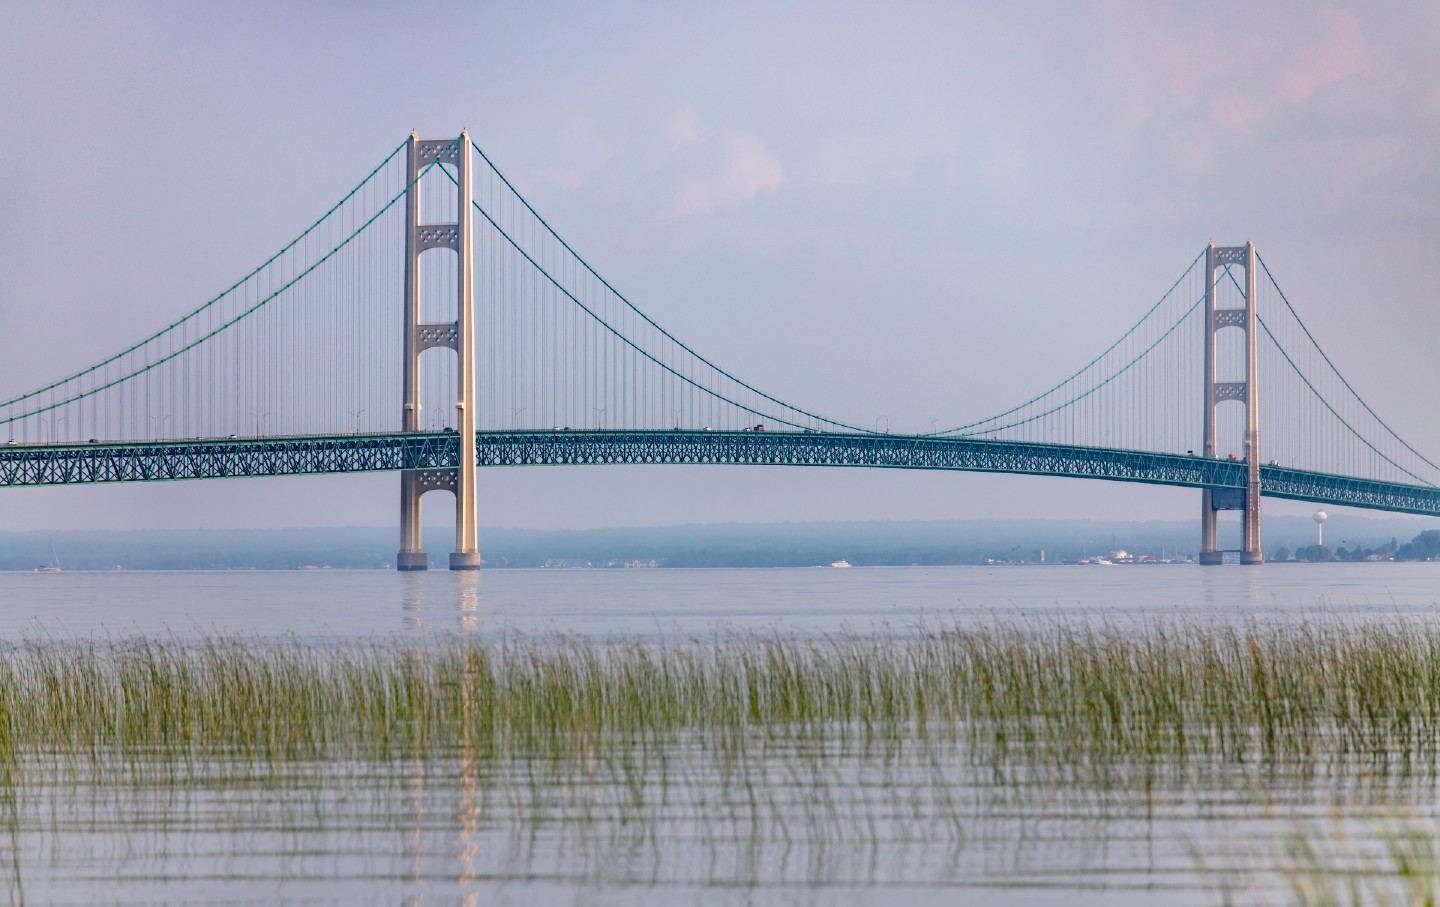 Big Oil in the Mackinac Straits Is a Disaster Waiting to Happen